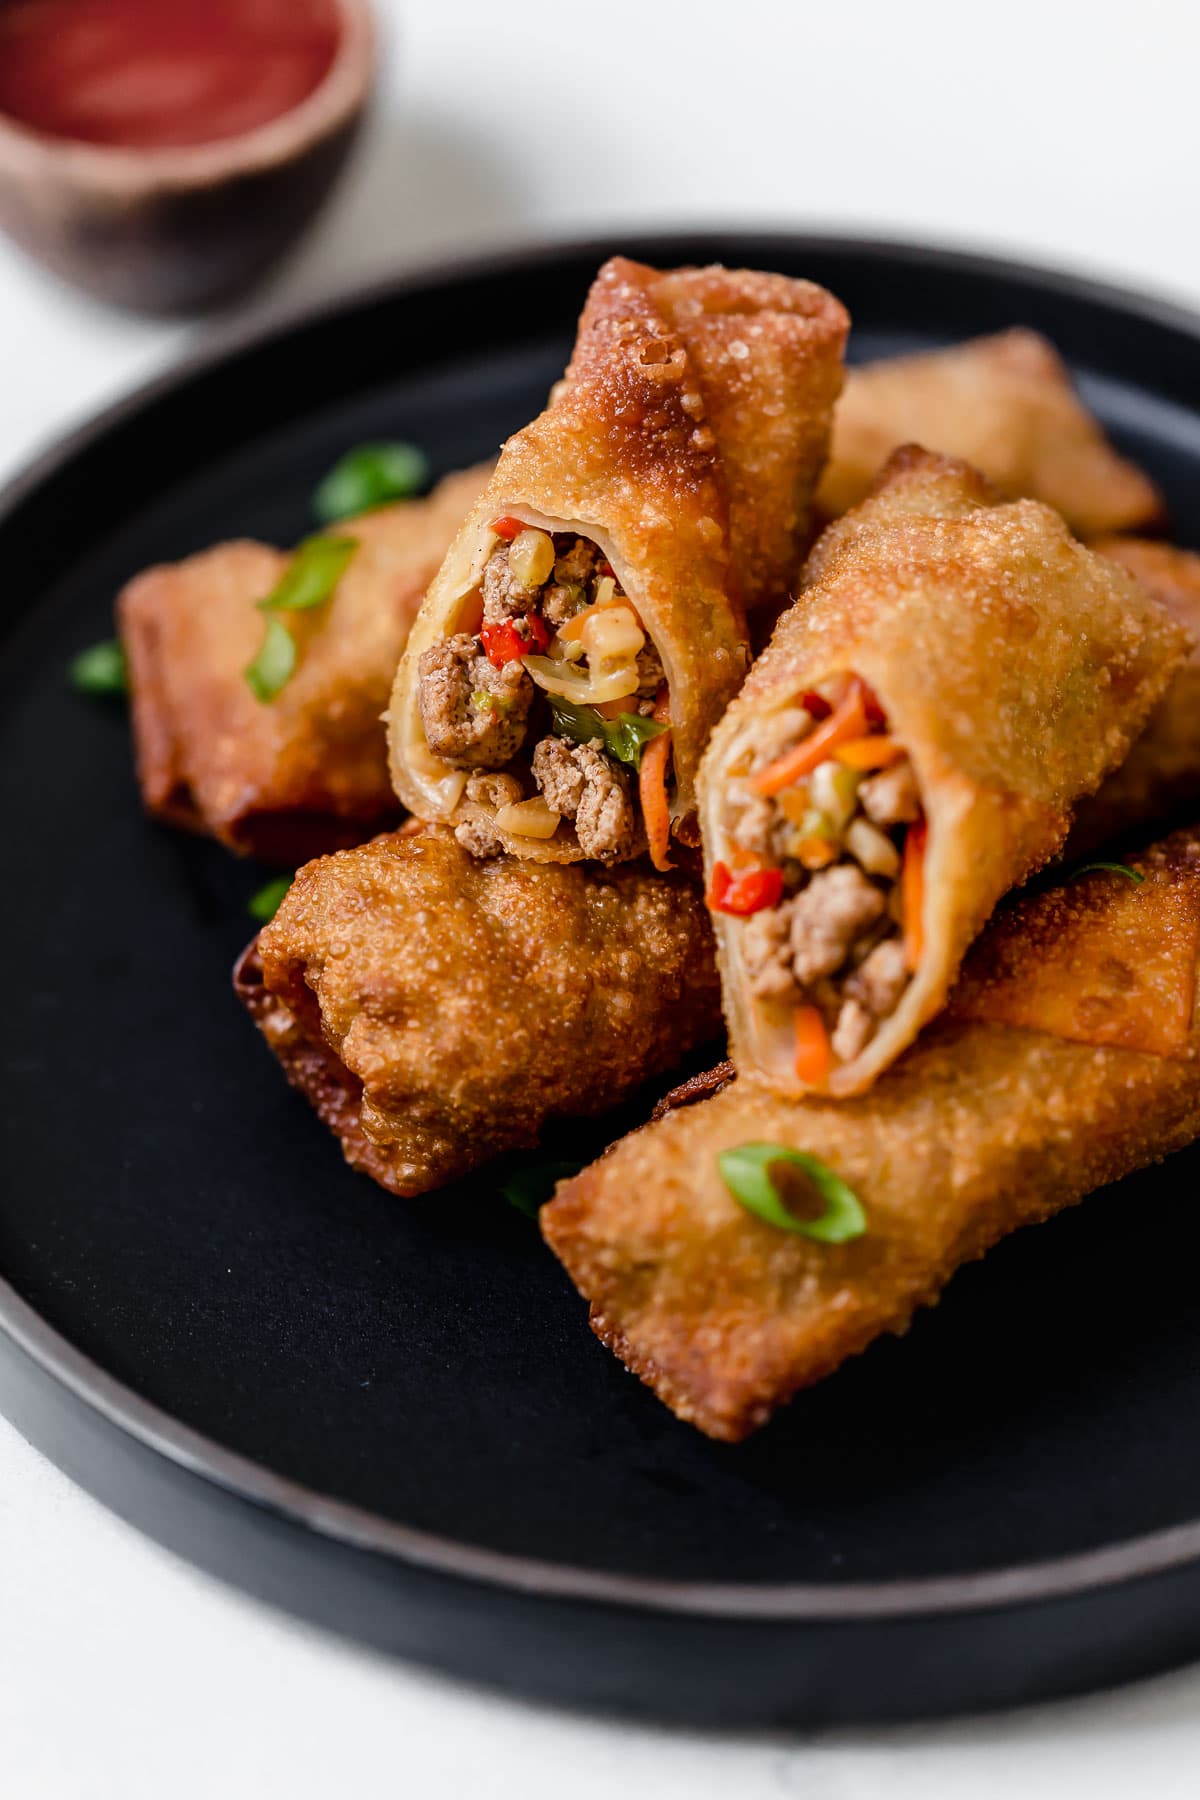 Egg rolls stacked on a black plate with one cut in half to show exterior.